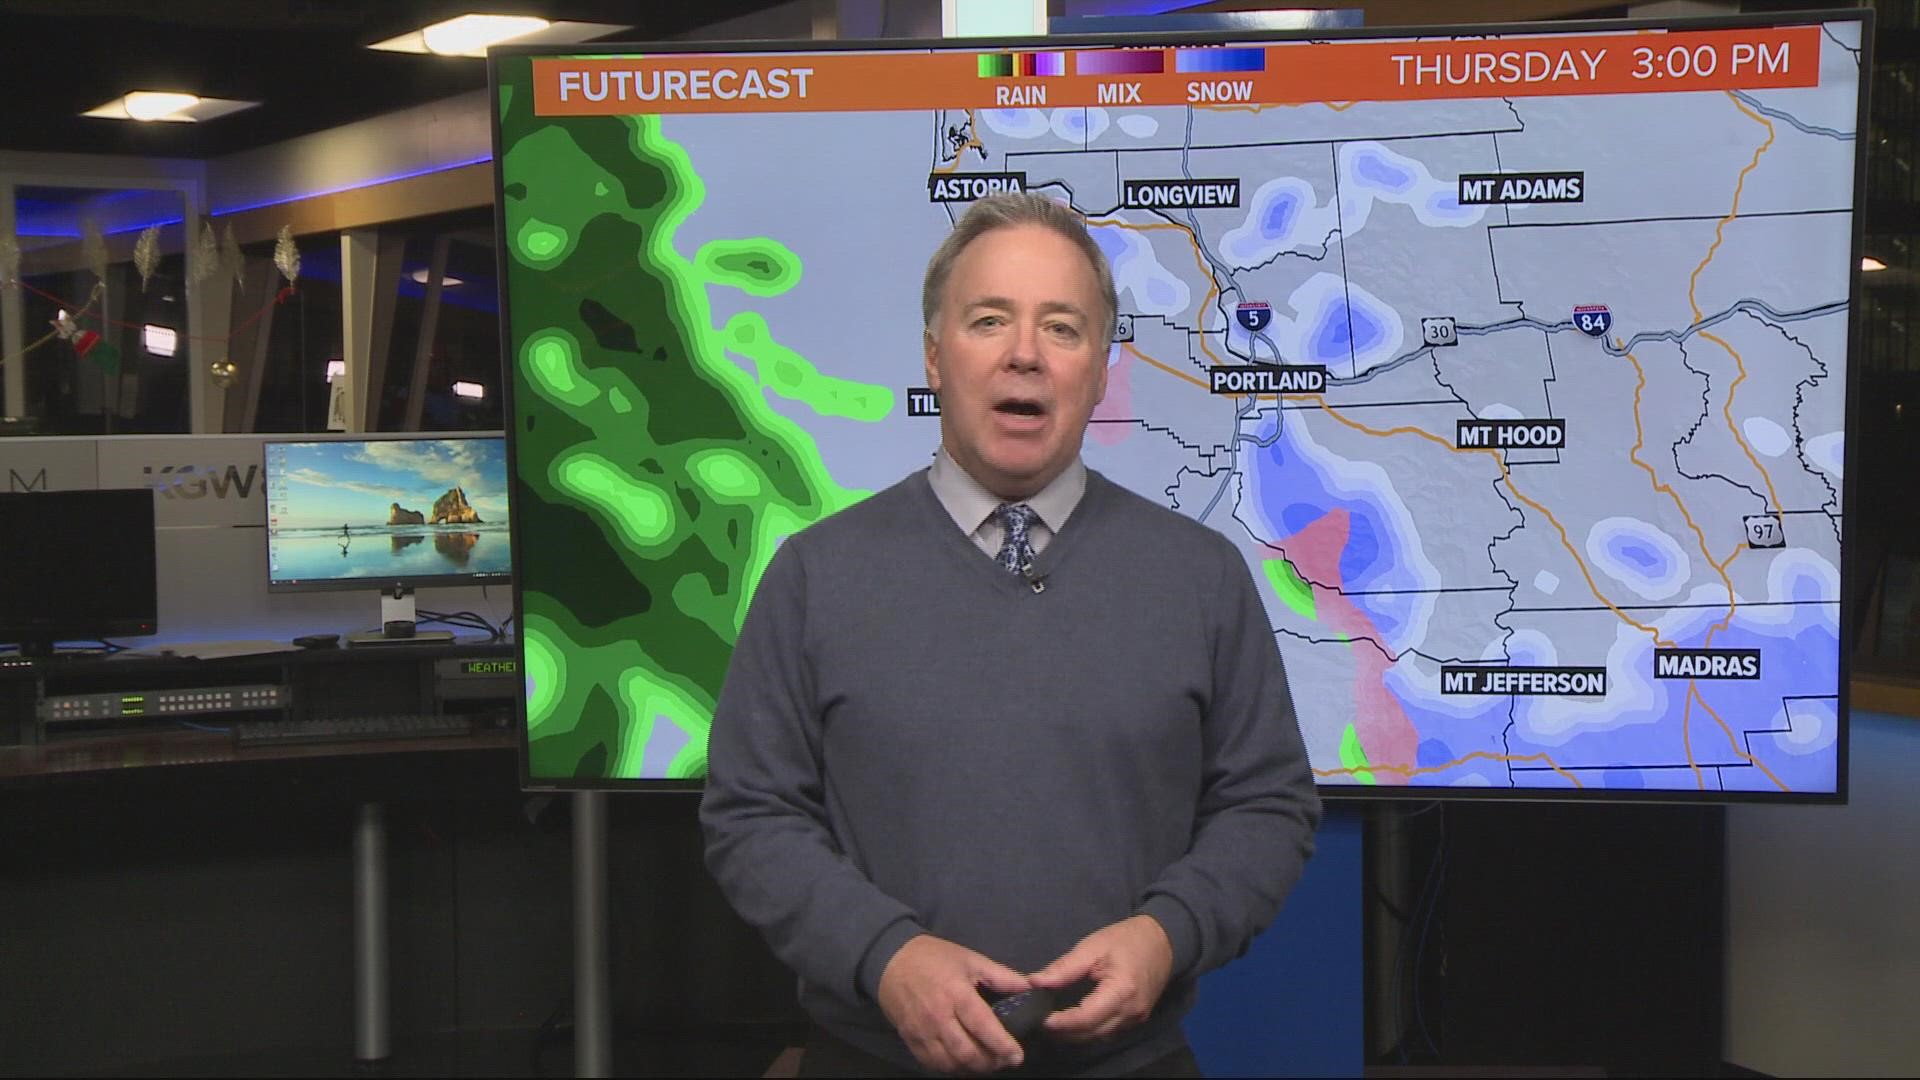 Both types of winter weather are expected as part of an ice storm in Portland this week. KGW meteorologist Rod Hill explains why we'll see ice rather than snow.